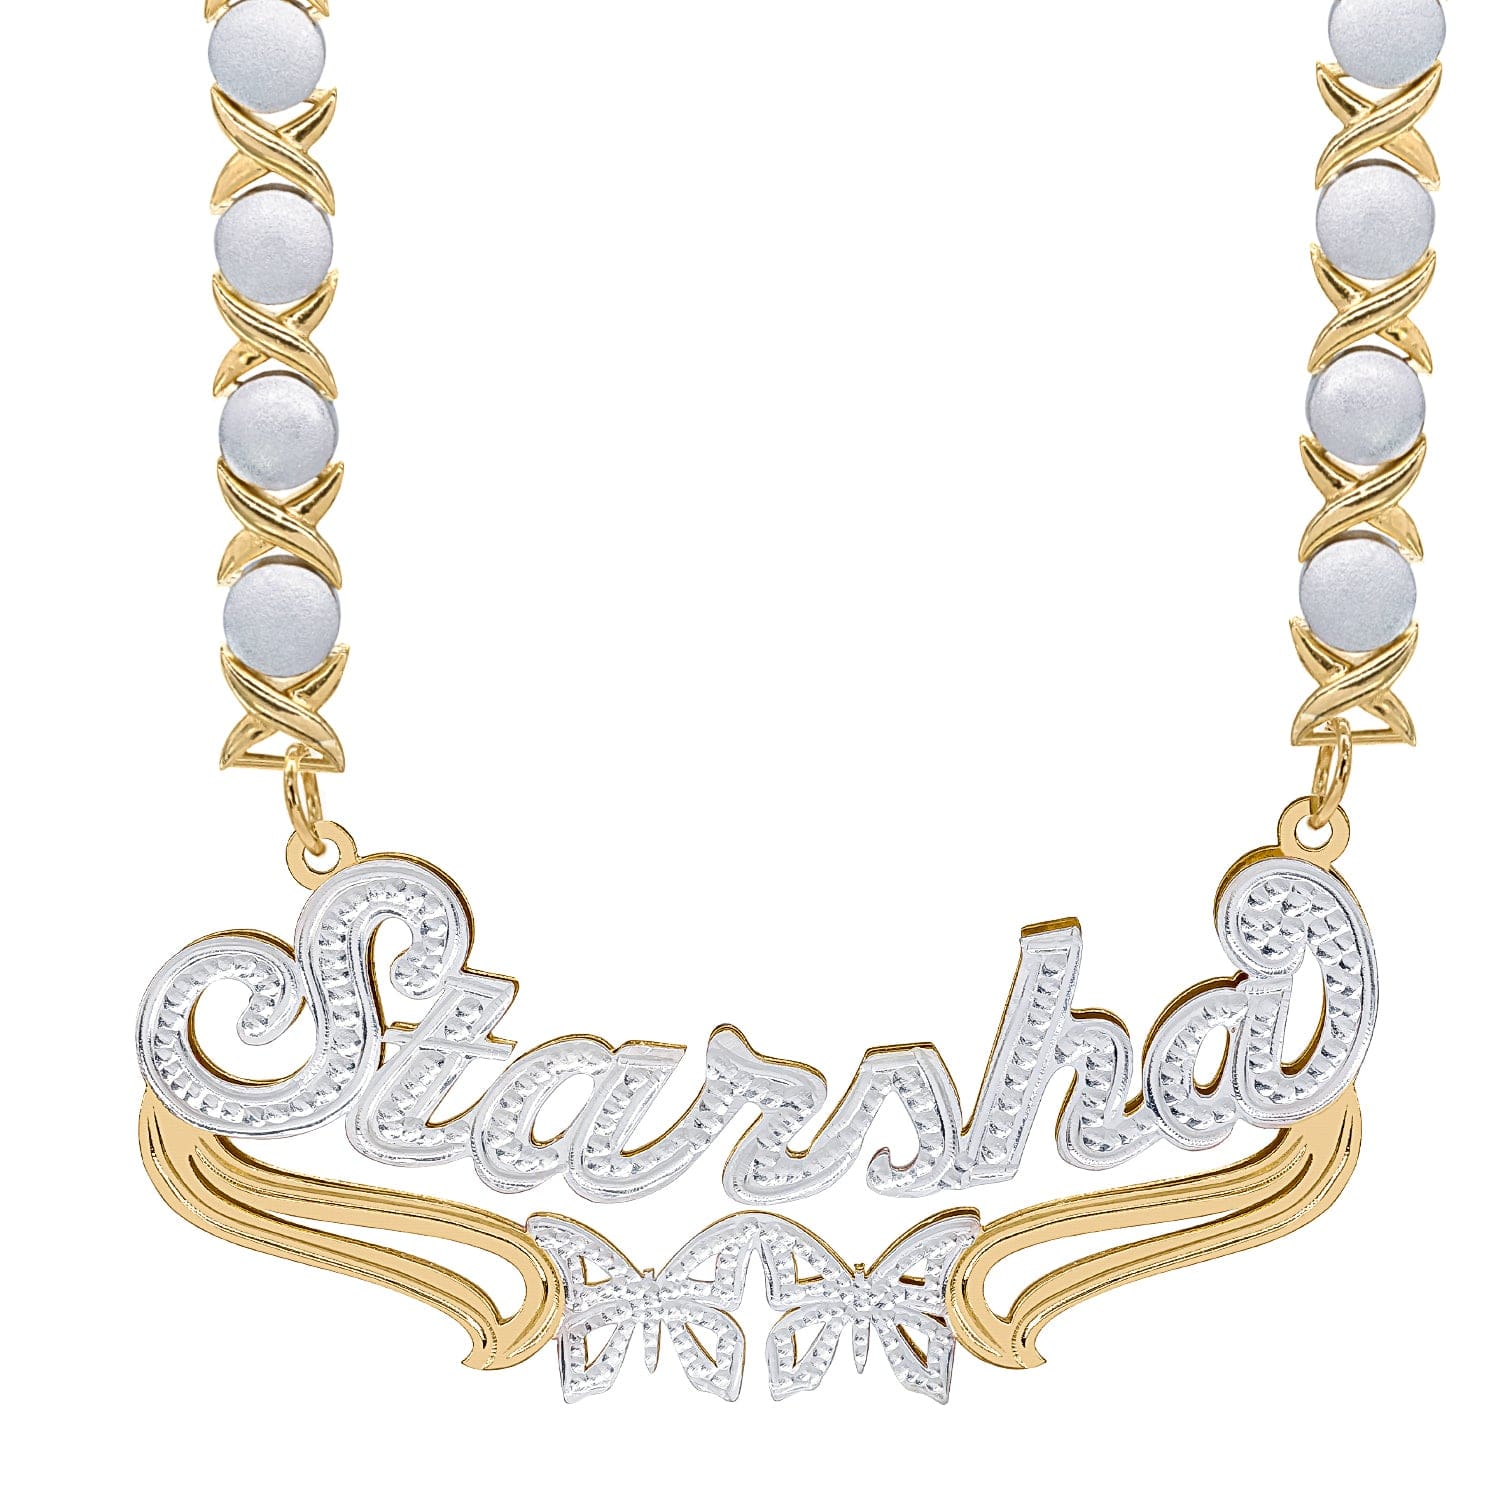 Two-Tone. Sterling Silver / Rhodium Xoxo Chain Custom Double Plated Name Necklace "Starsha" with Rhodium Xoxo Chain